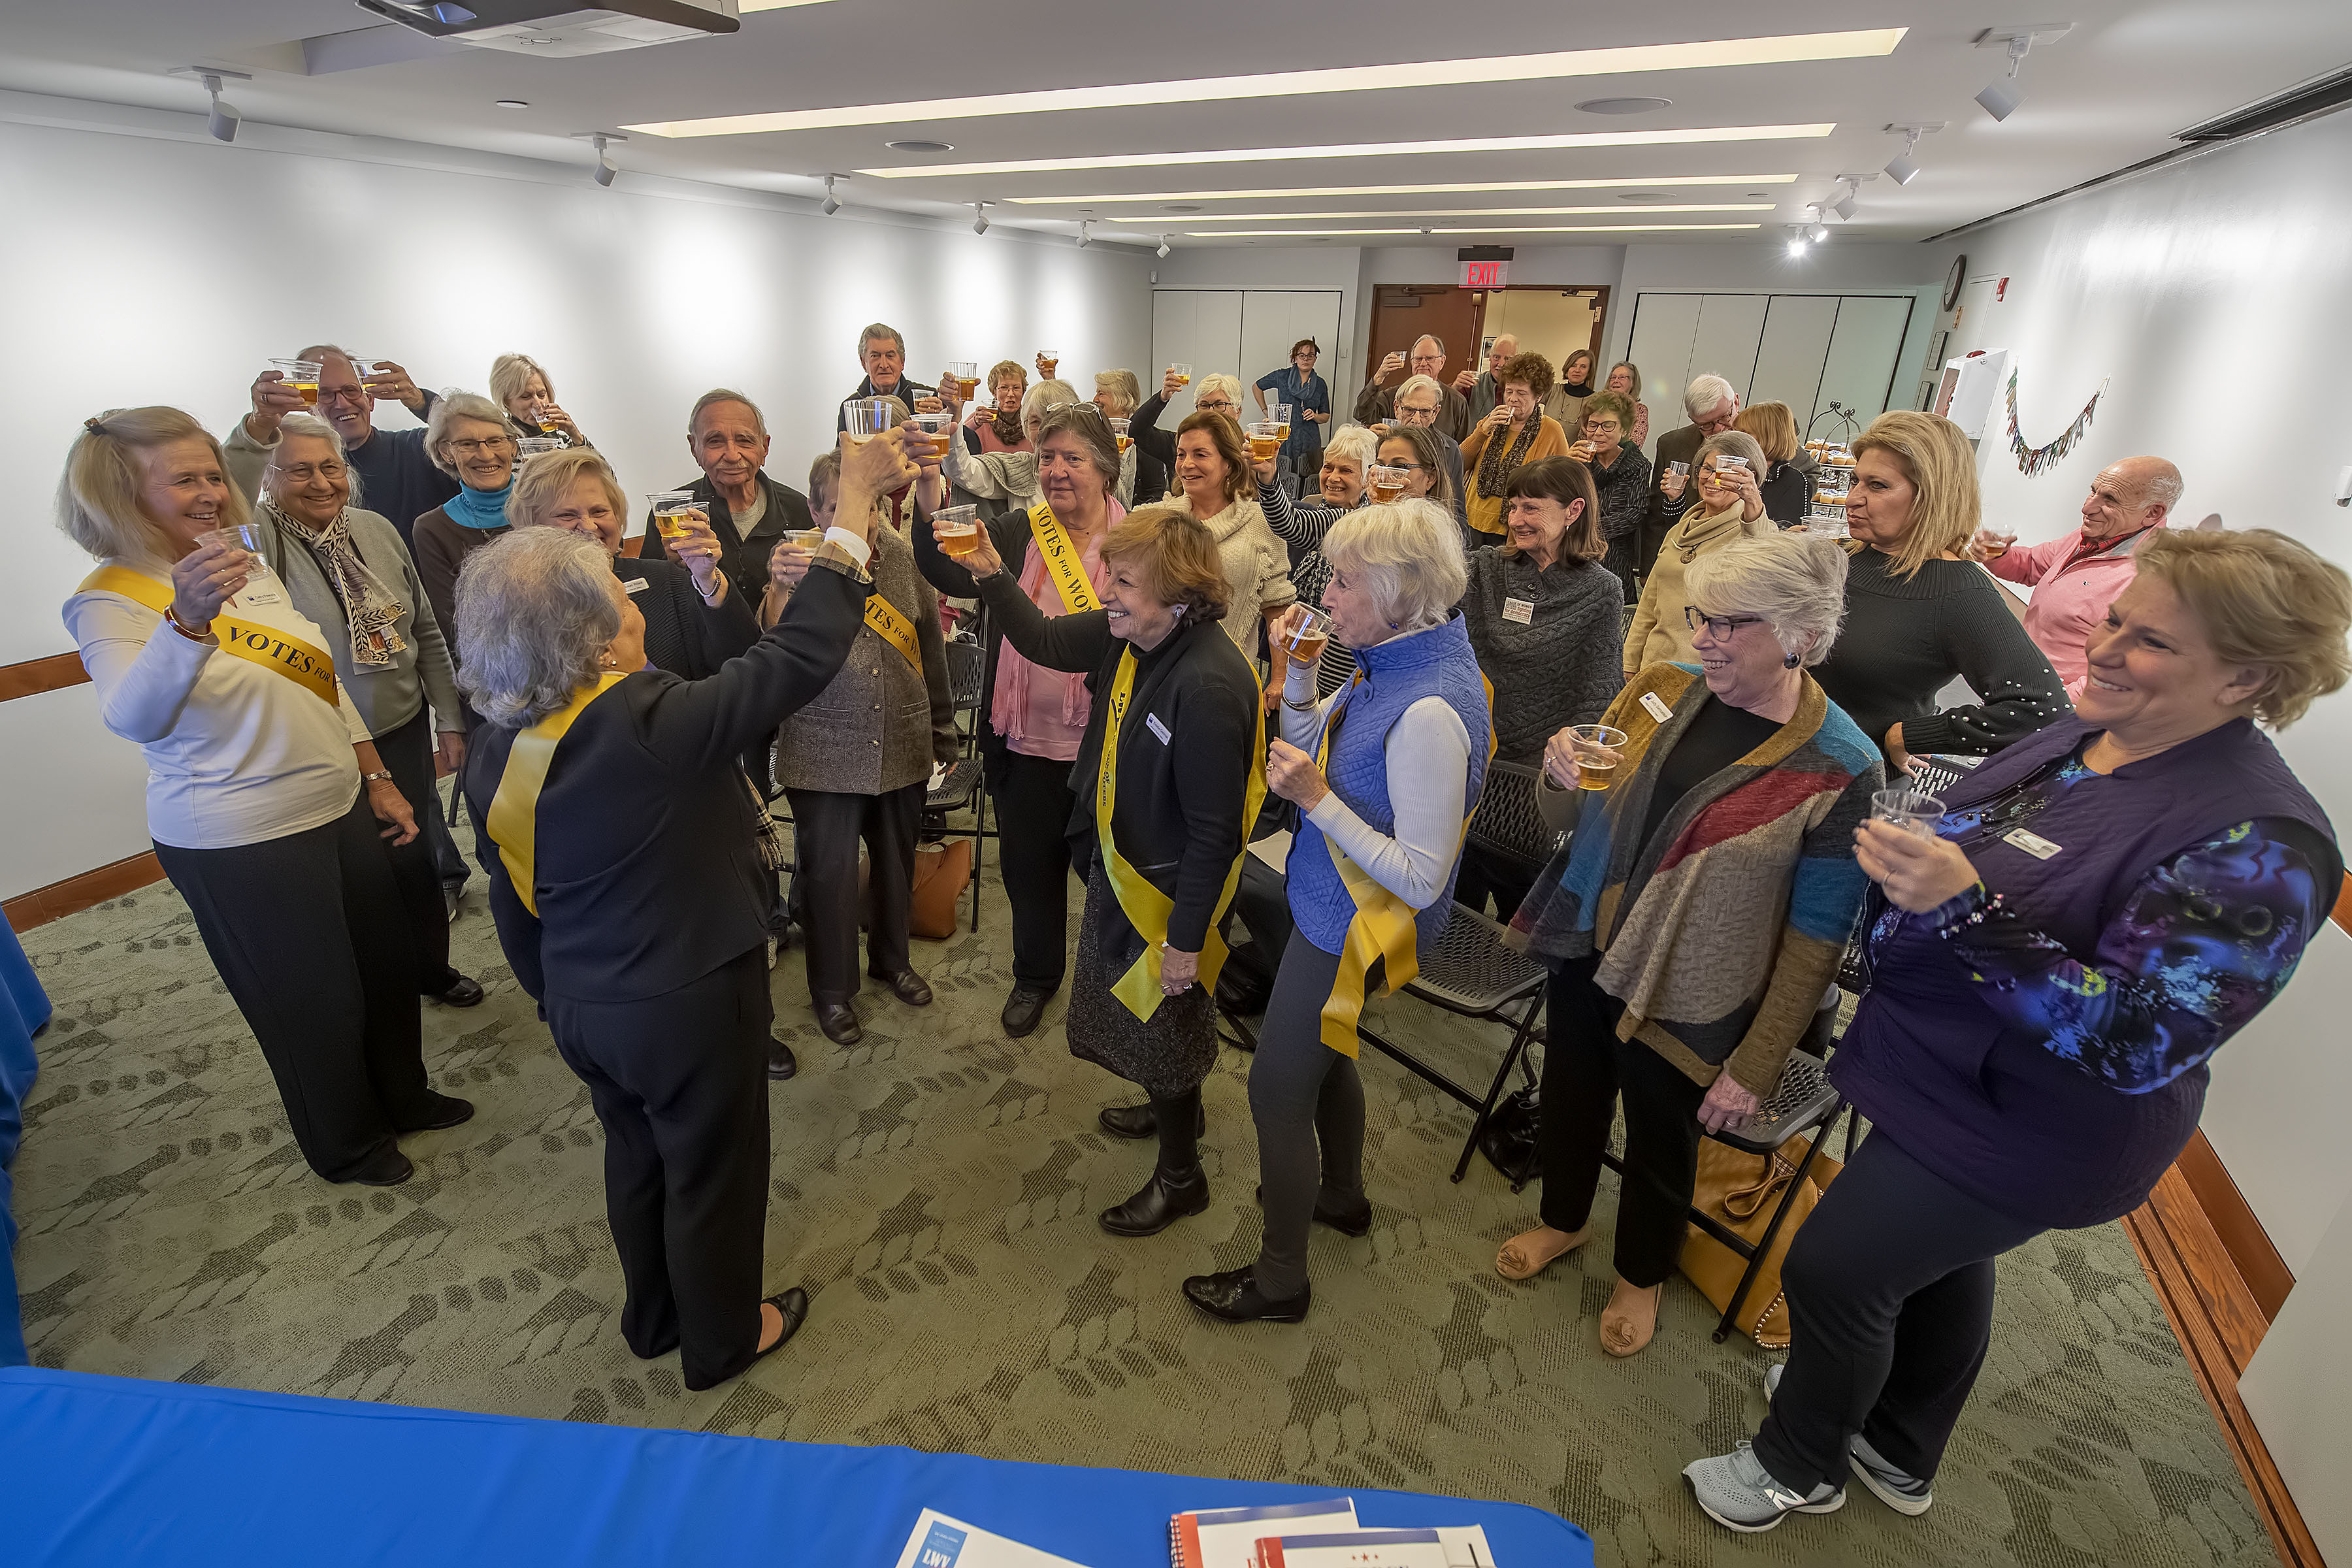 League officers and attendees raise their glasses in a toast during a gathering to celebrate of the 100th Anniversary of the League of Women Voters at the Hampton Library on Monday.